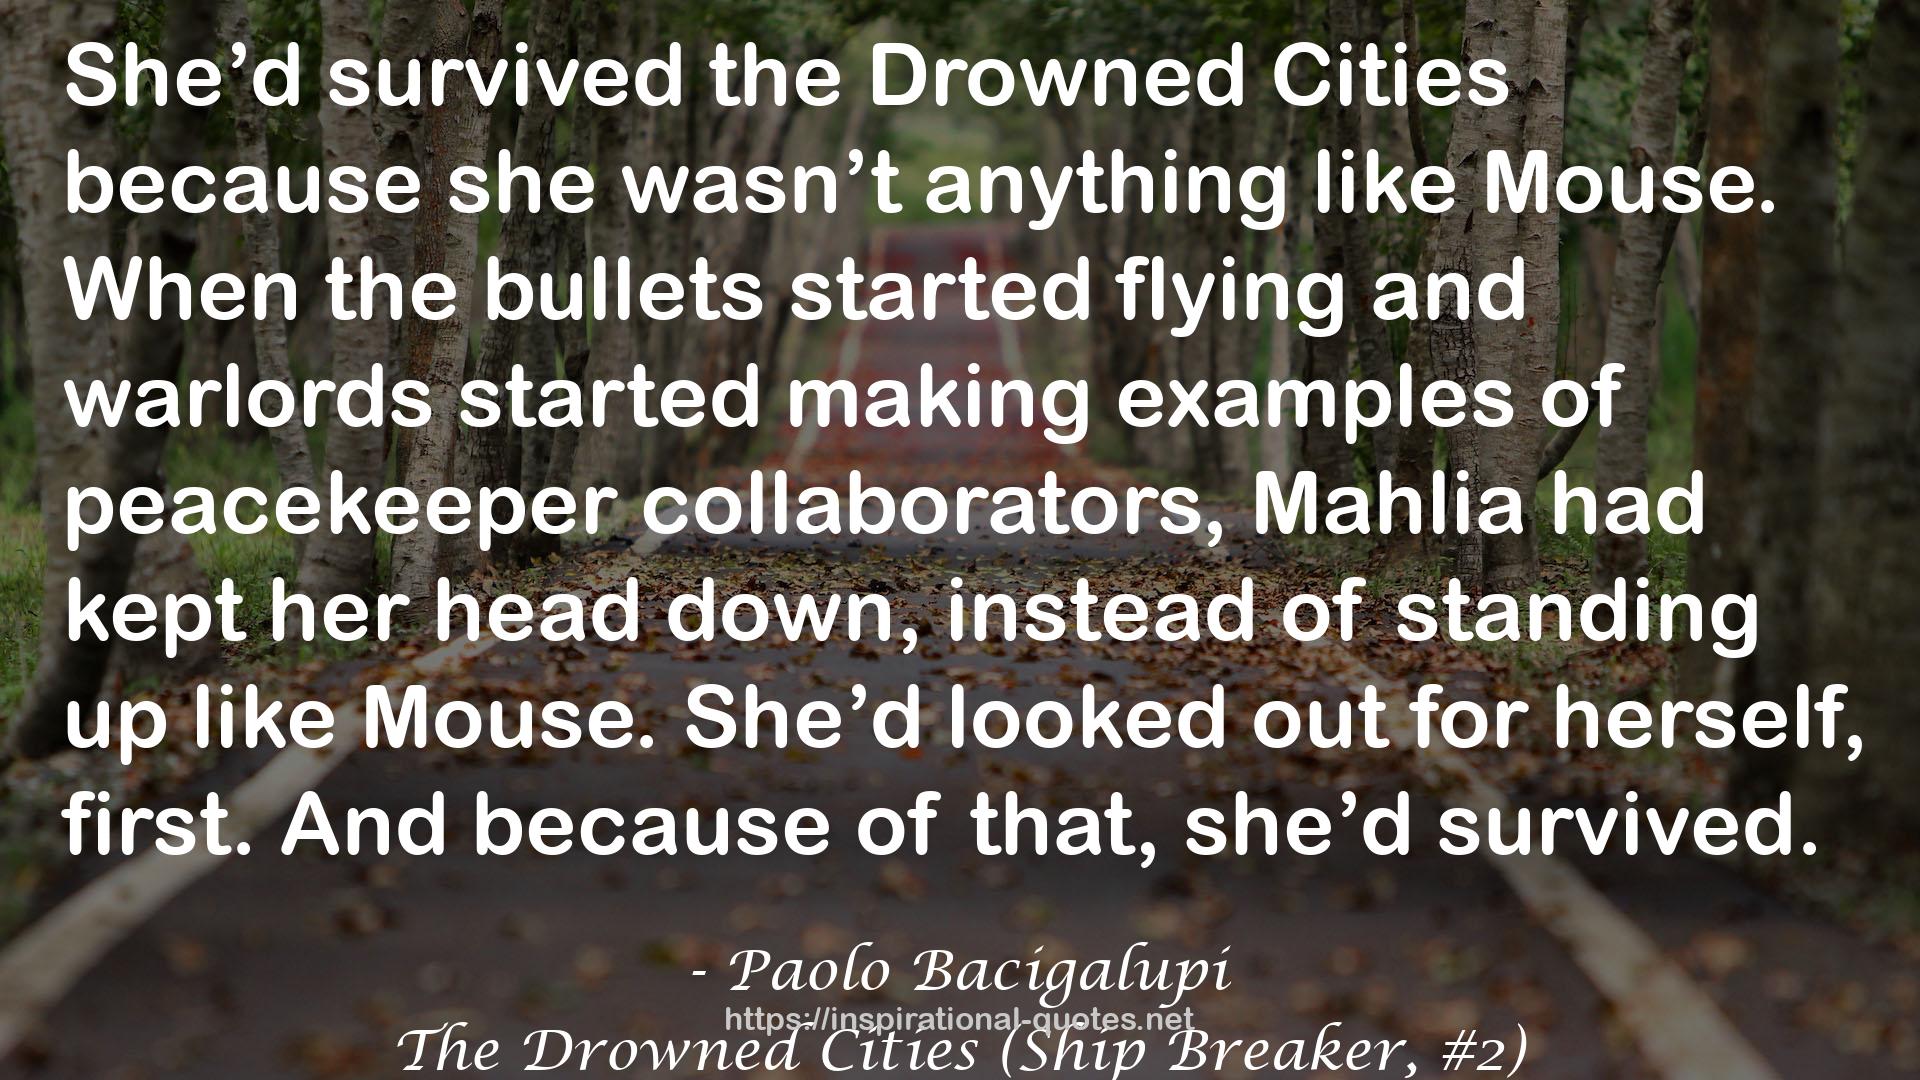 The Drowned Cities (Ship Breaker, #2) QUOTES